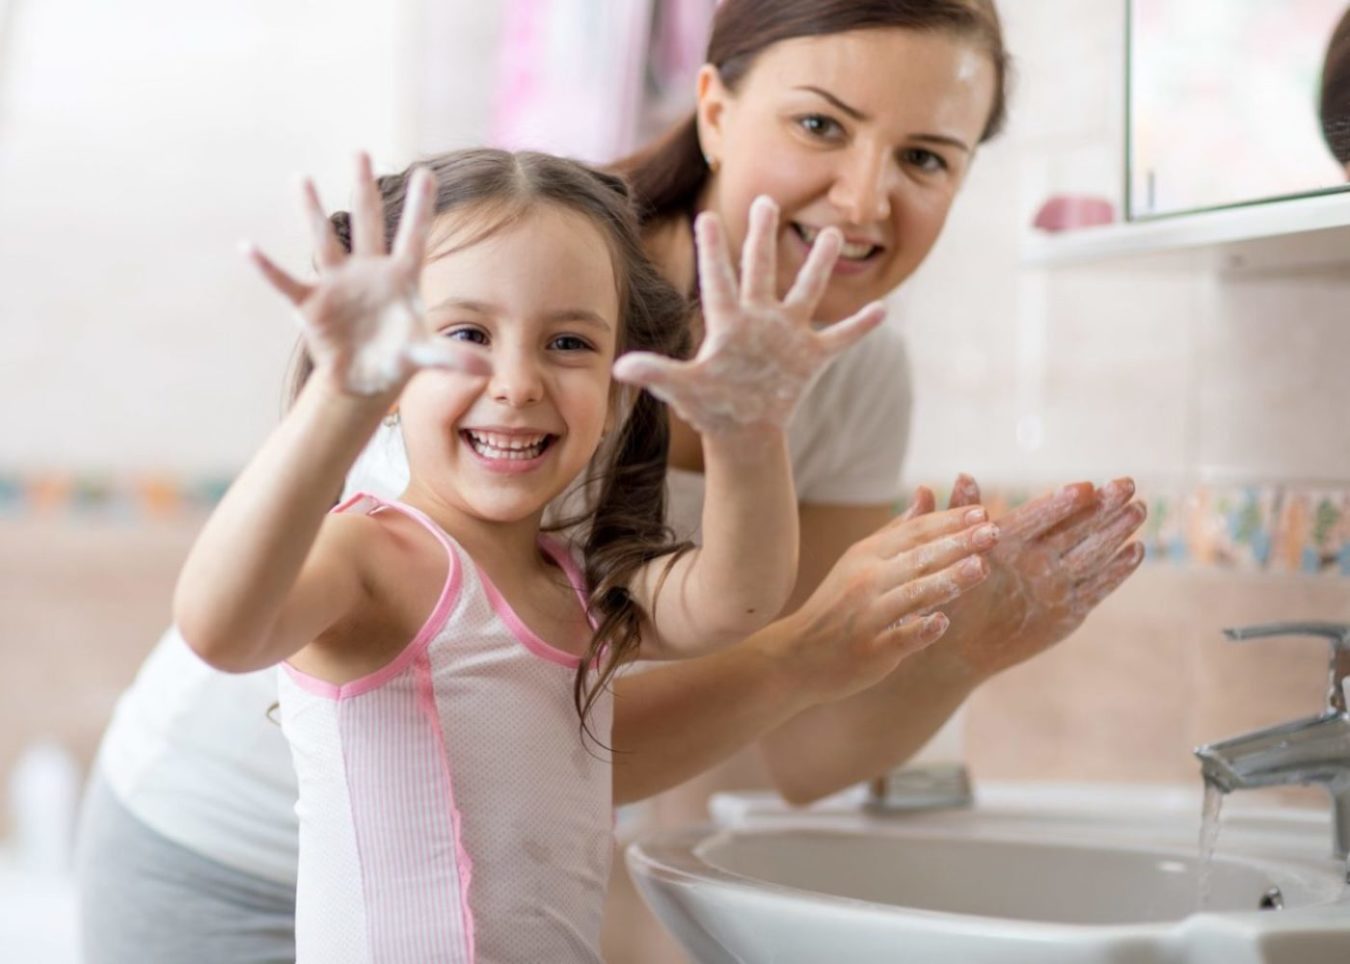 A little girl excited about washing her hands with her mother